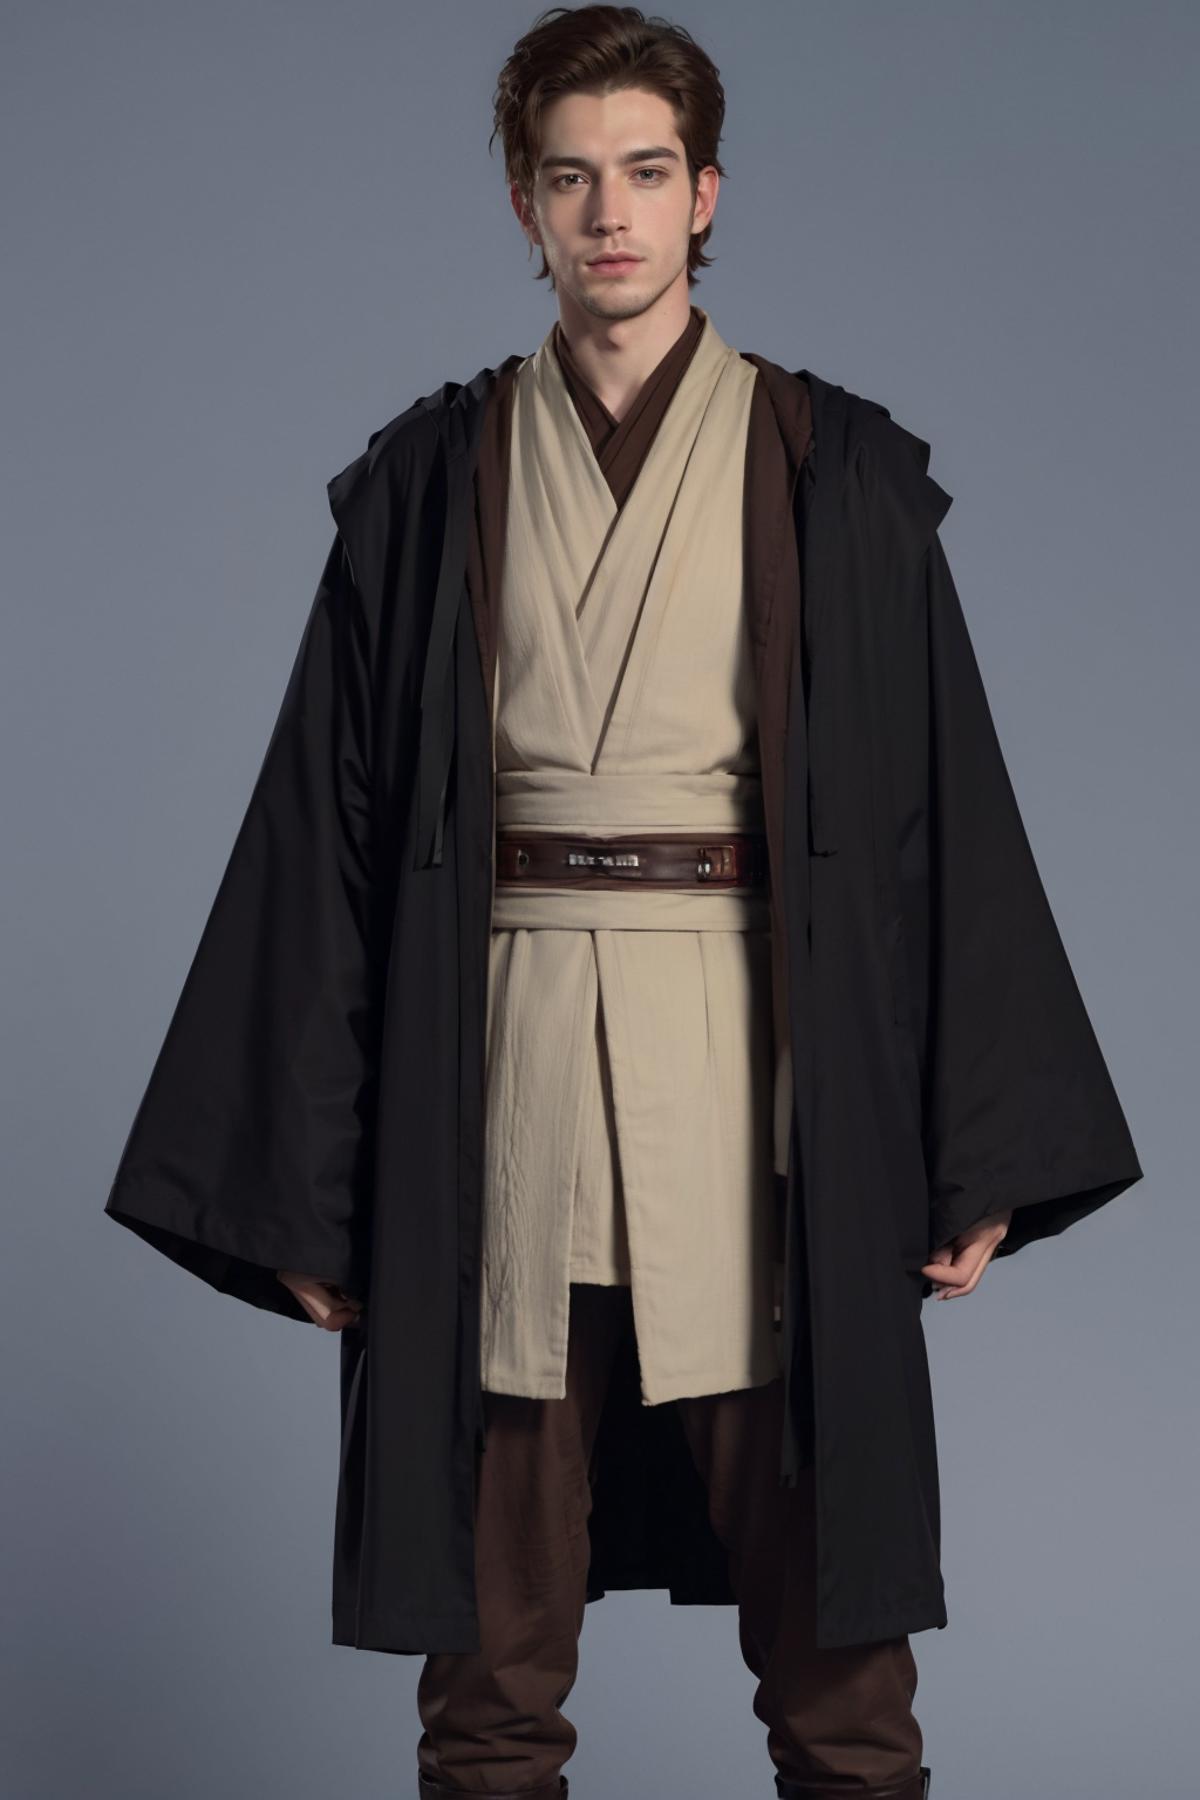 [Y5] Jedi outfit 绝地武士服装 image by Y5targazer